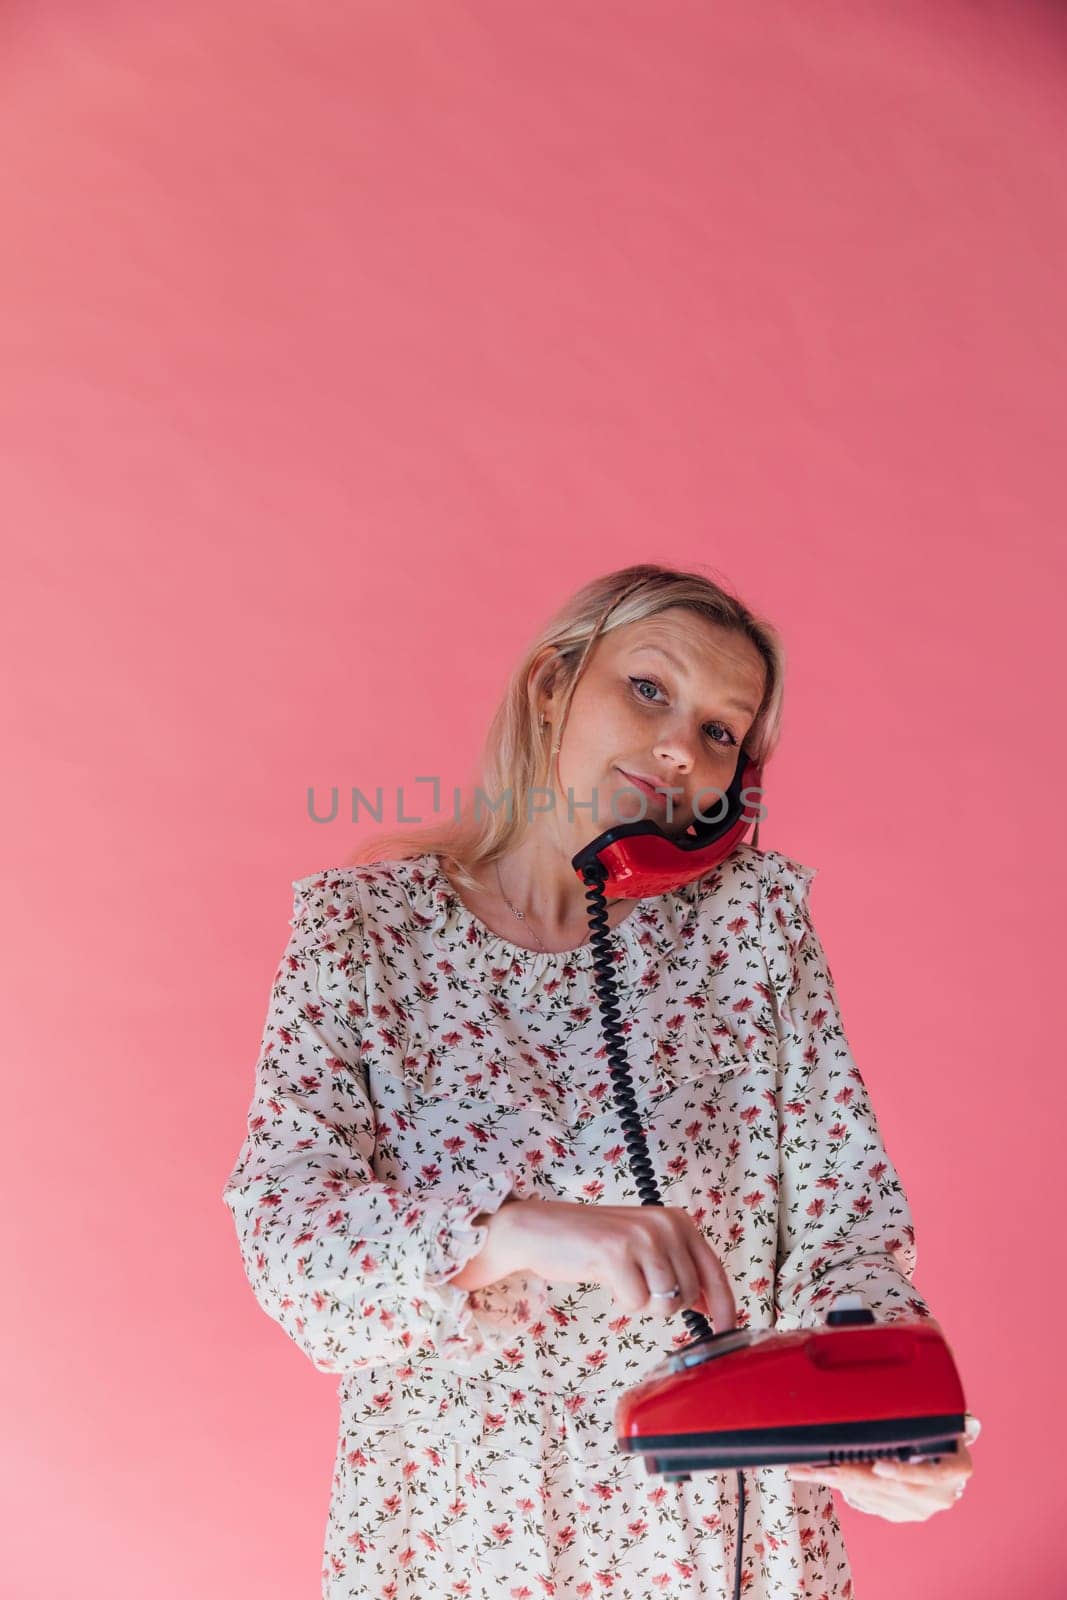 Woman talking on an old wired phone by Simakov